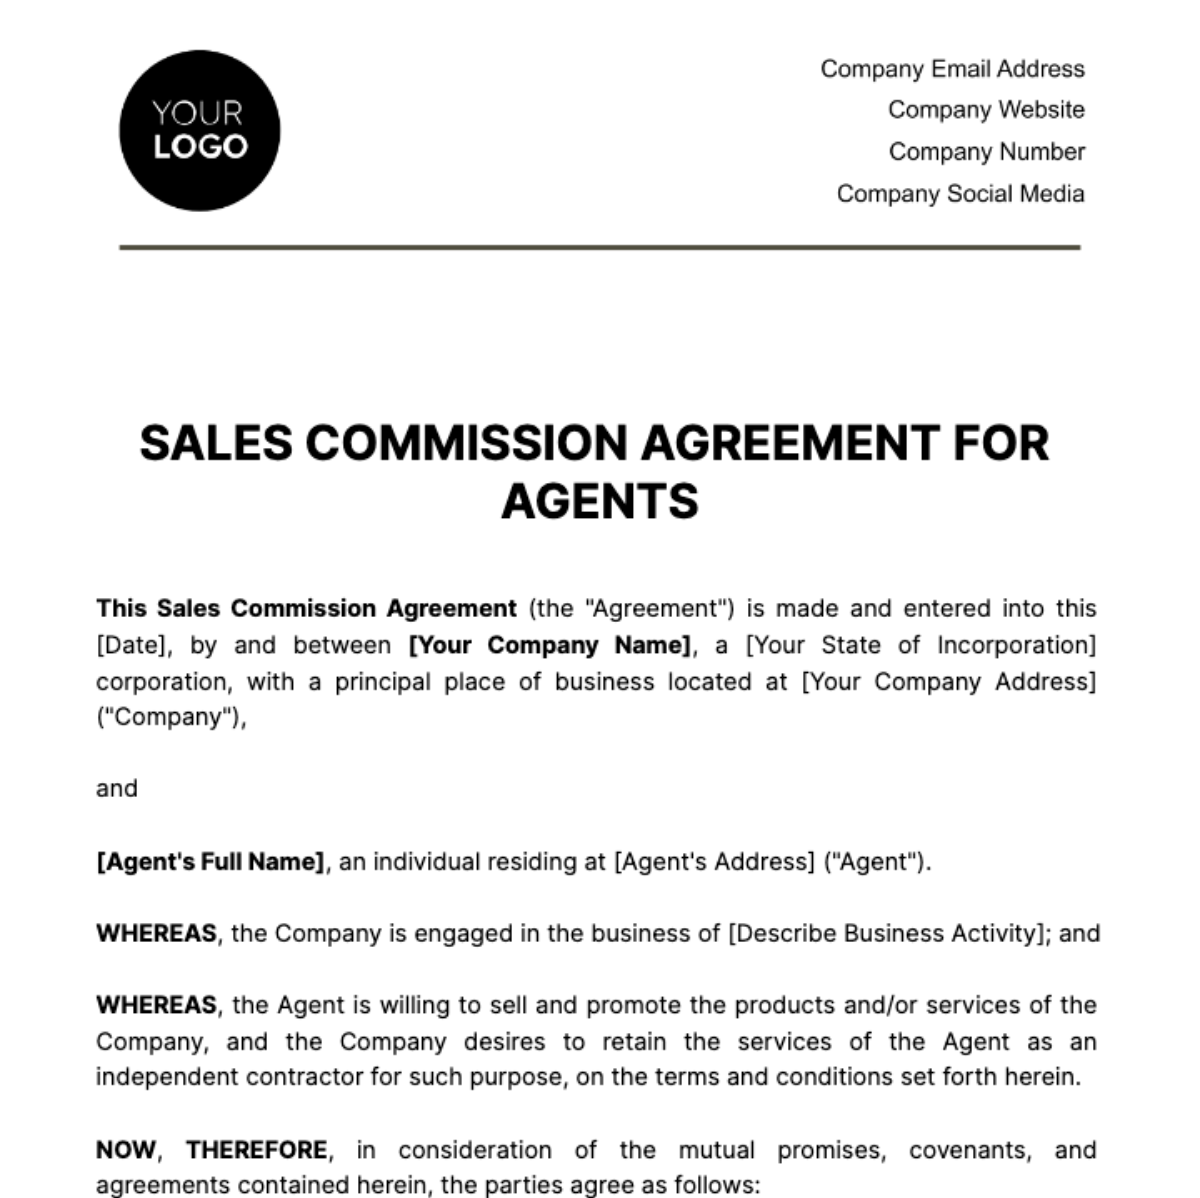 Free Sales Commission Agreement for Agents Template